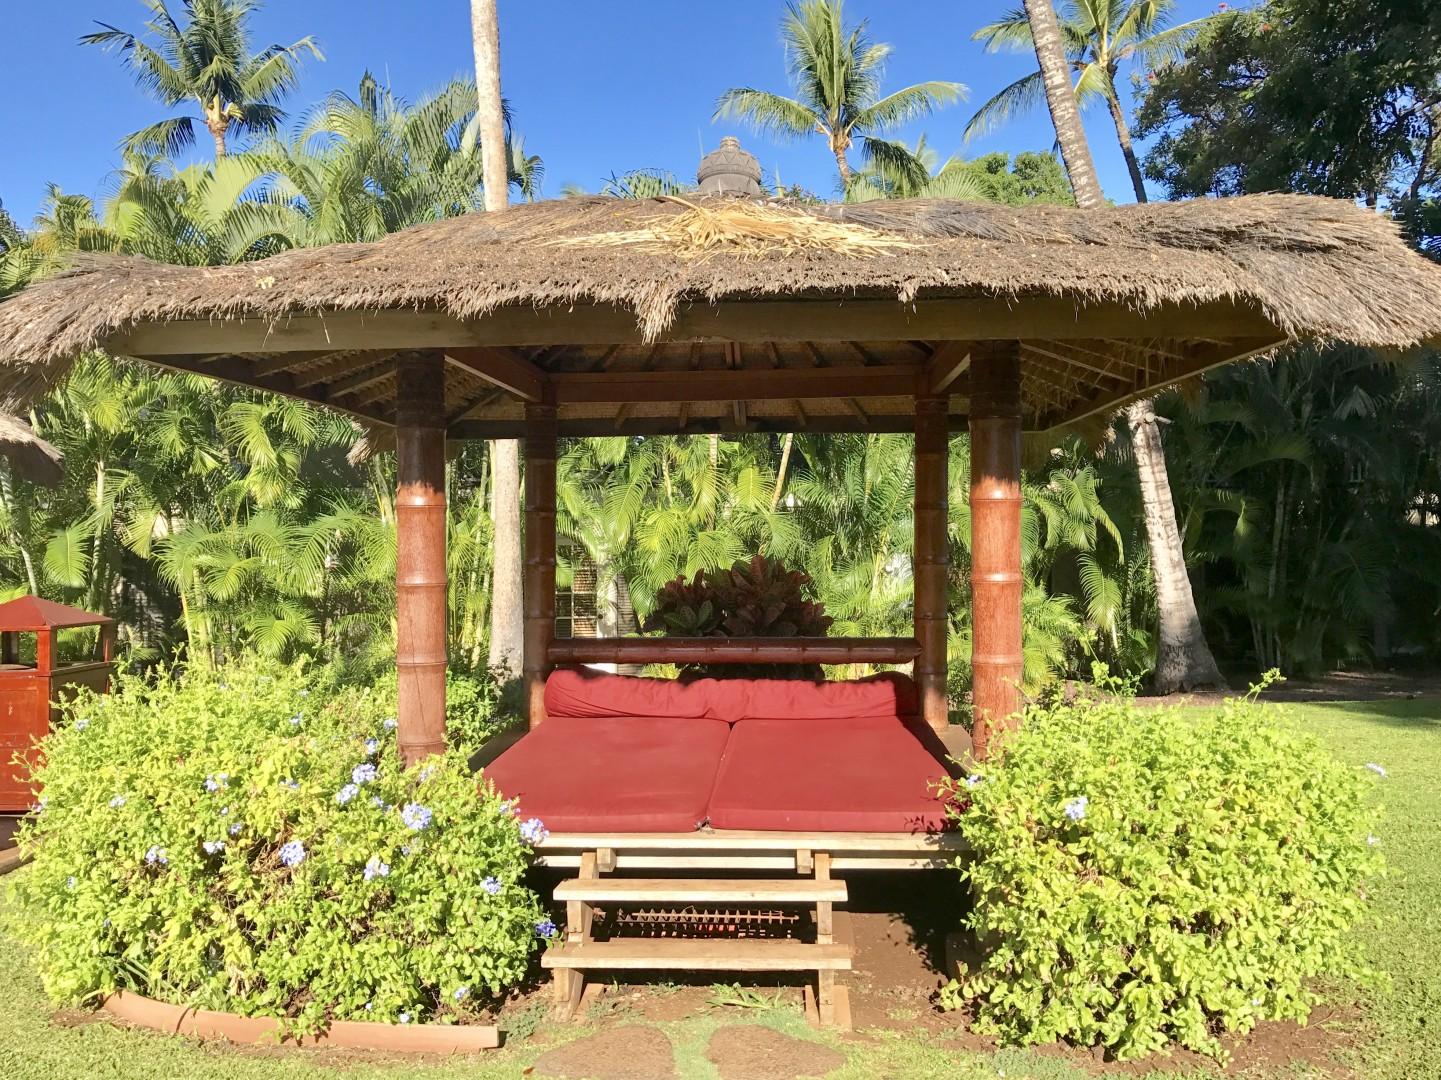 Lahaina Vacation Rentals, Aina Nalu F201: Top Floor, Hawaiian Hideaway in the Heart - Enjoy a good book or a quick nap in one of the poolside cabanas.